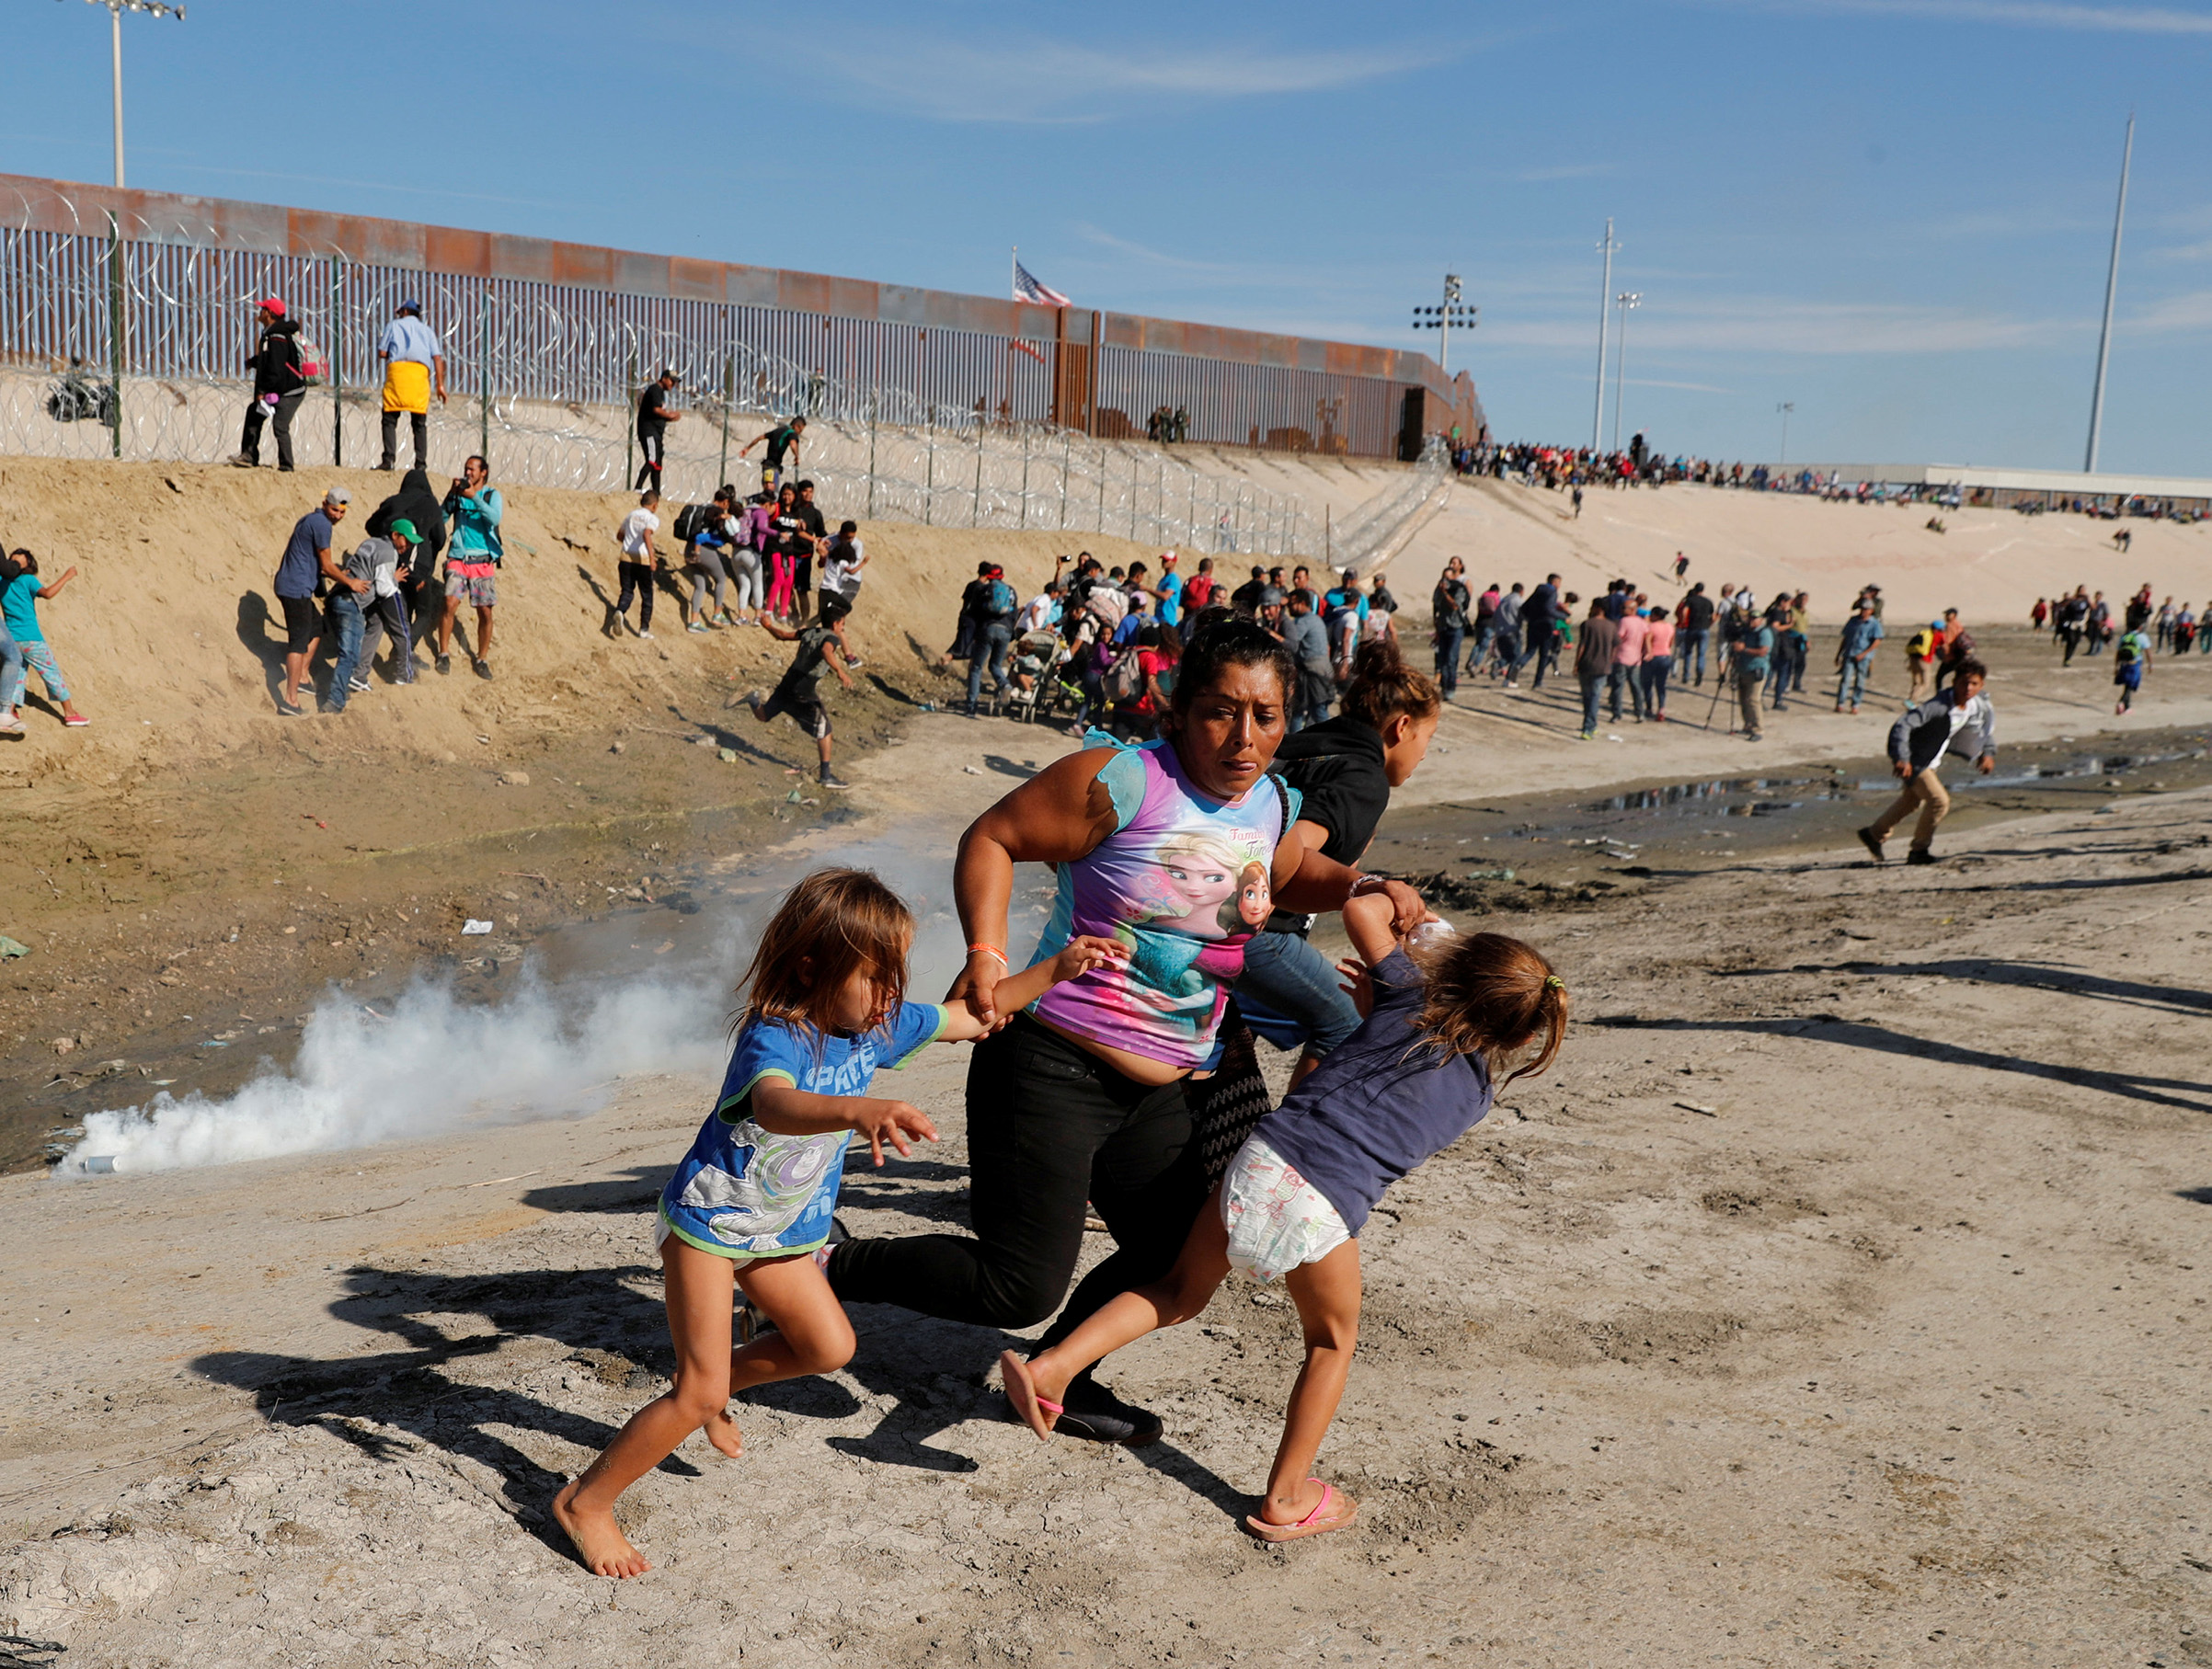 A migrant family, part of a caravan of thousands traveling from Central America to the United States, run away from tear gas in front of the border wall between the U.S. and Mexico in Tijuana, Mexico, on Nov. 25, 2018. (Kim Kyung Hoon—Reuters)